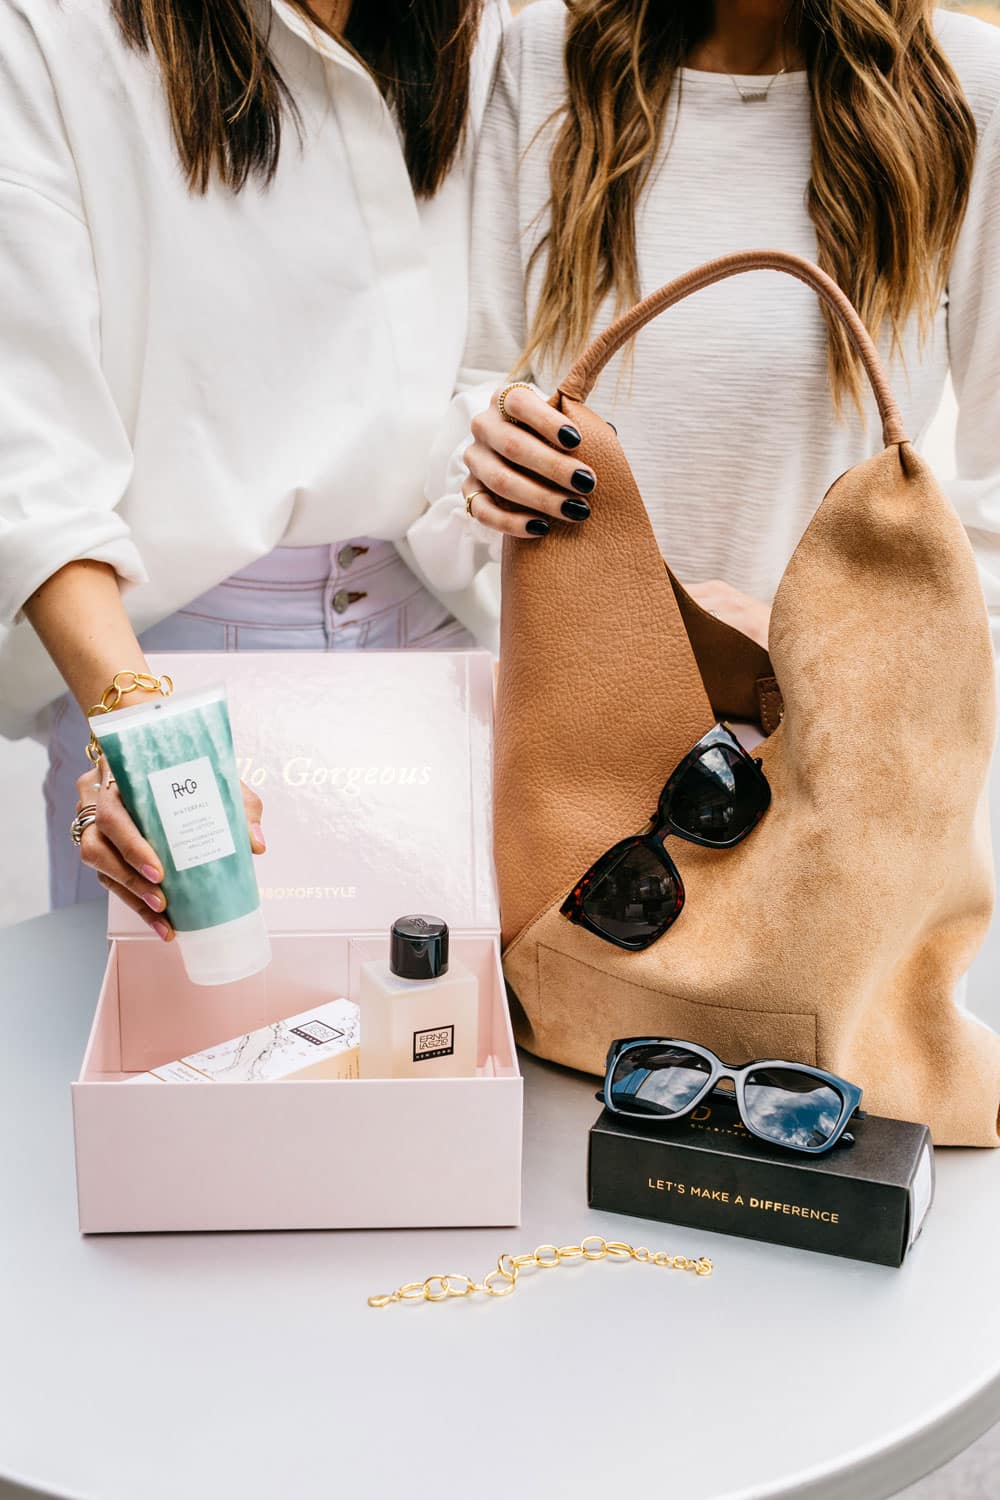 Chic at Every Age, Rachel Zoe Summer Box of Style 2020